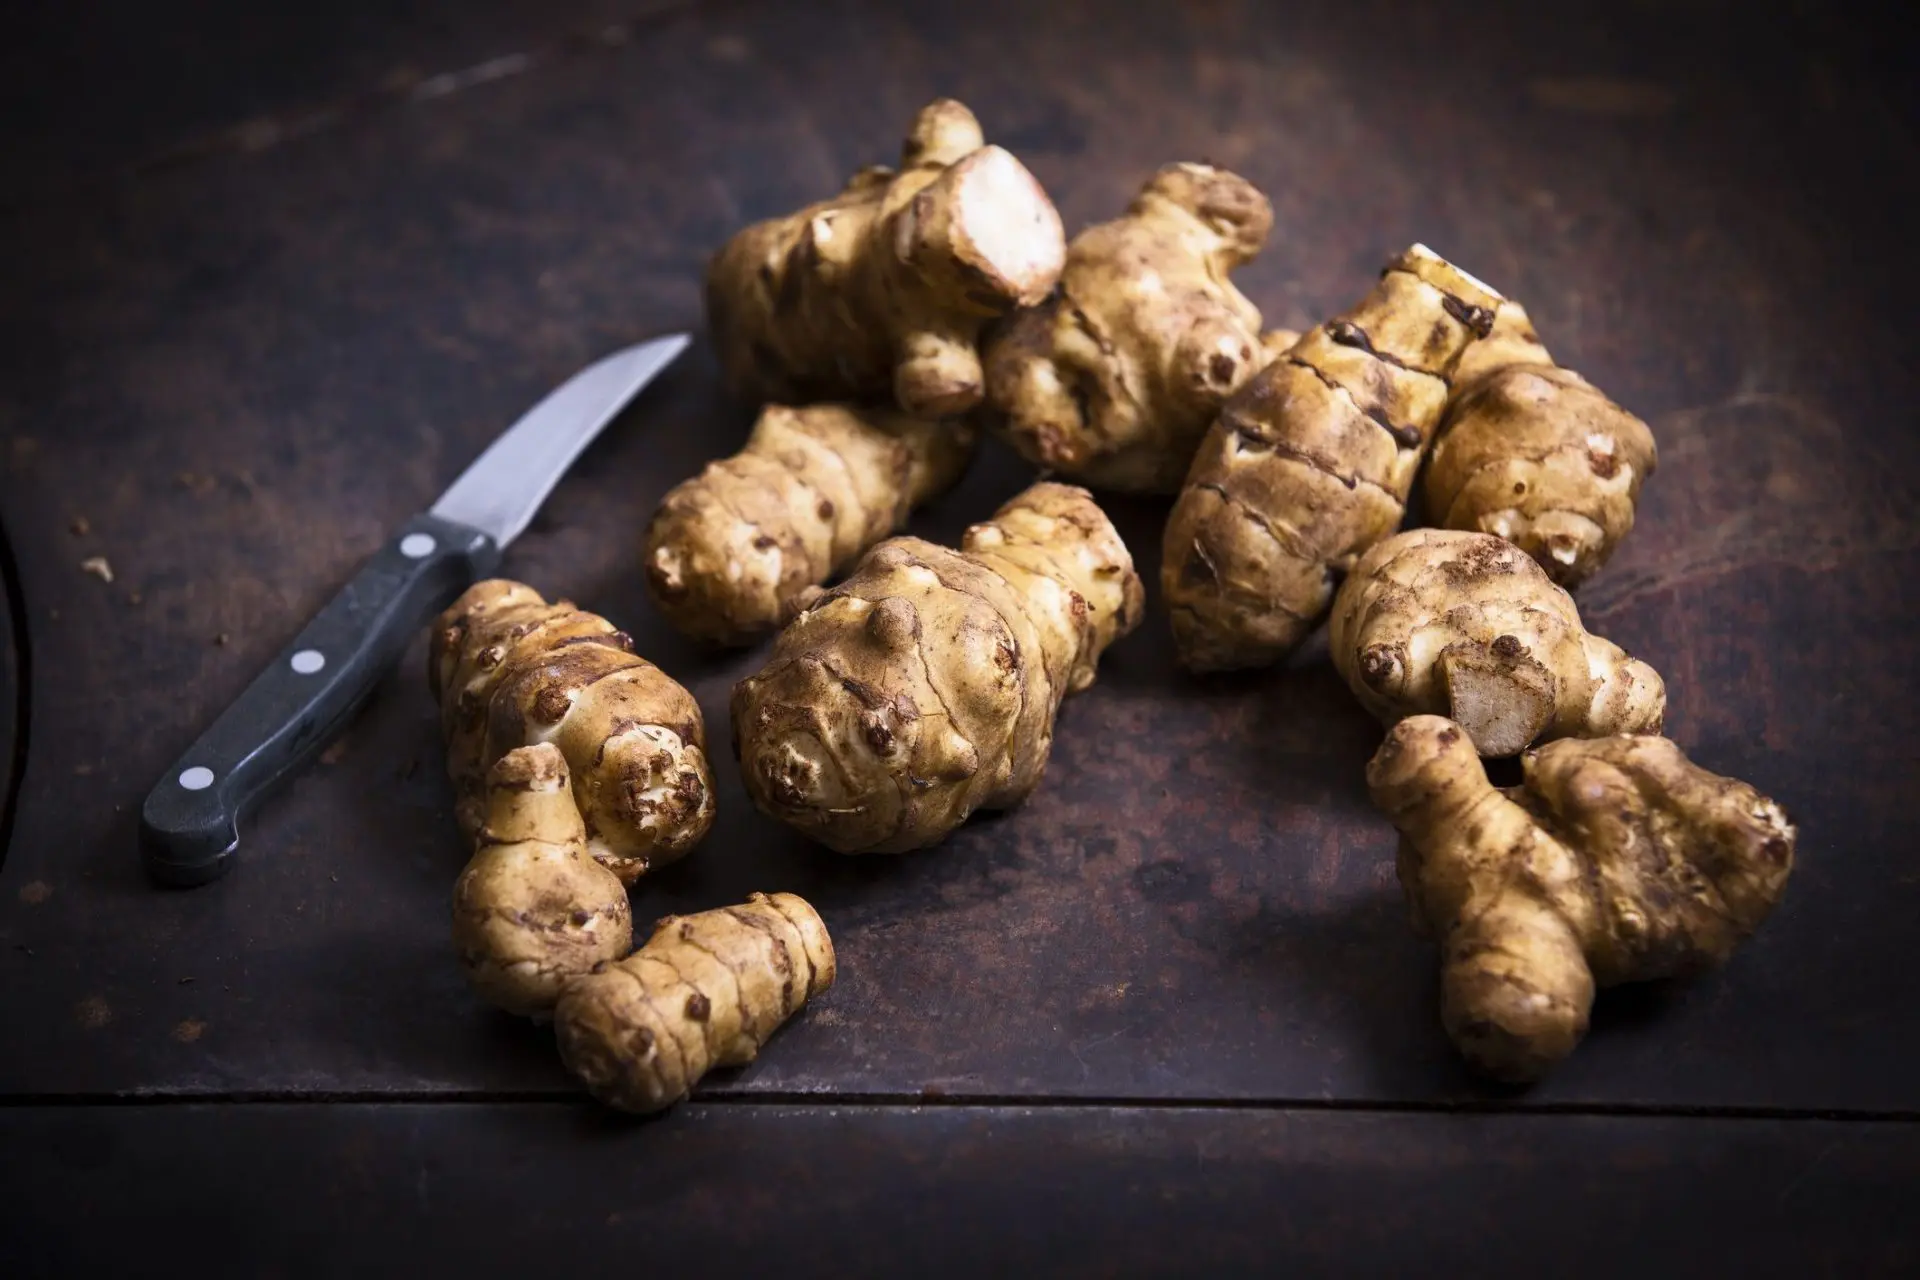 water chestnut substitute, substitute for water chestnuts, chestnut substitute, water chestnuts substitute, water chestnut replacement, jerusalem artichokes